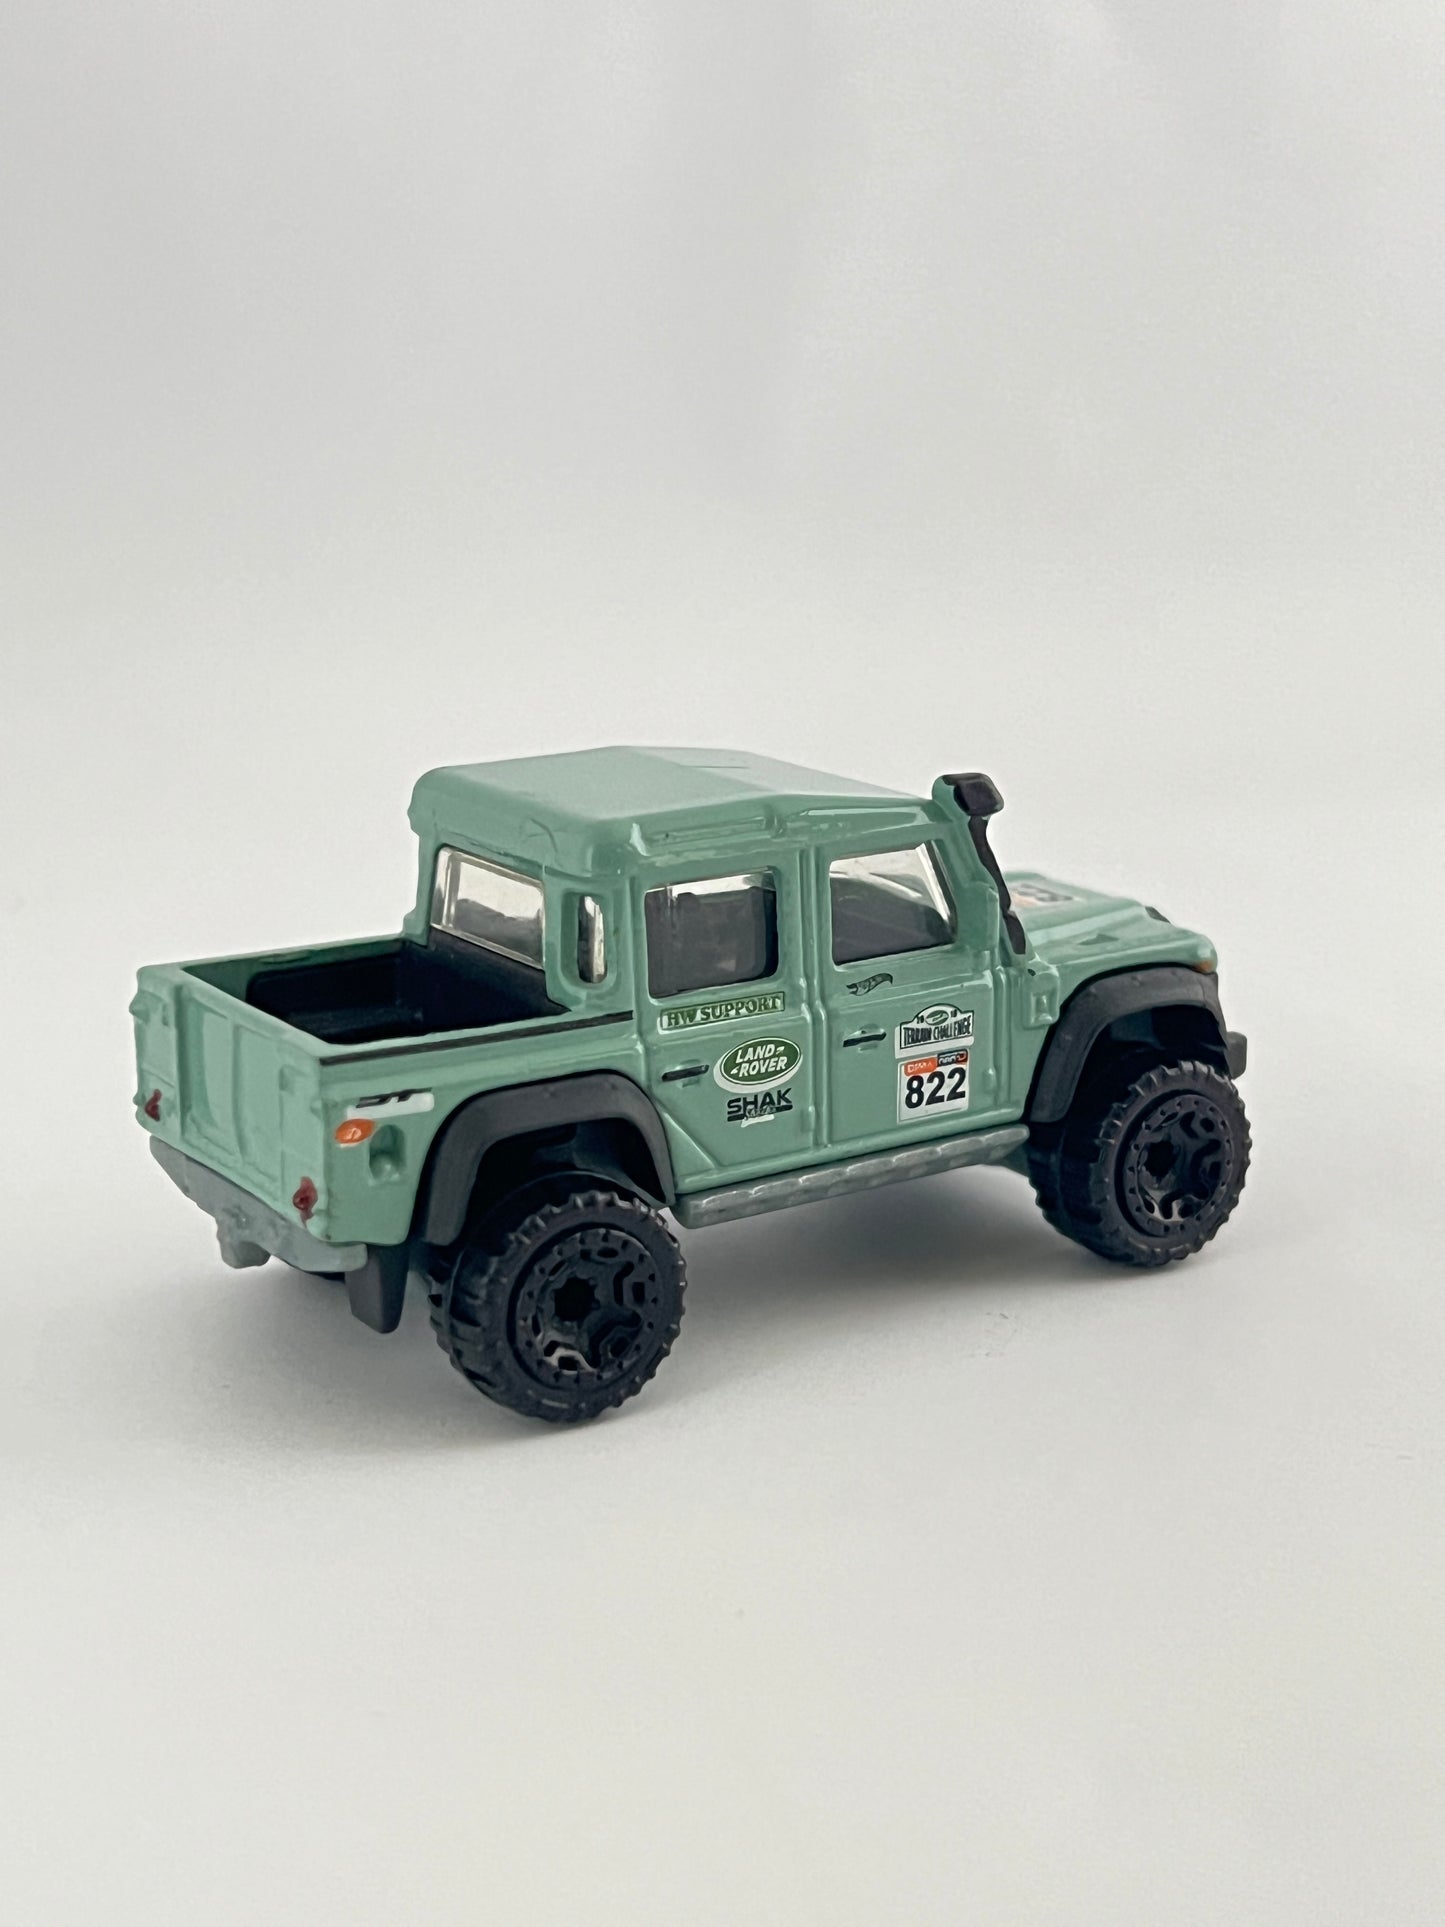 15 LAND ROVER DEFENDER DOUBLE CAB- UNCARDED - MINT